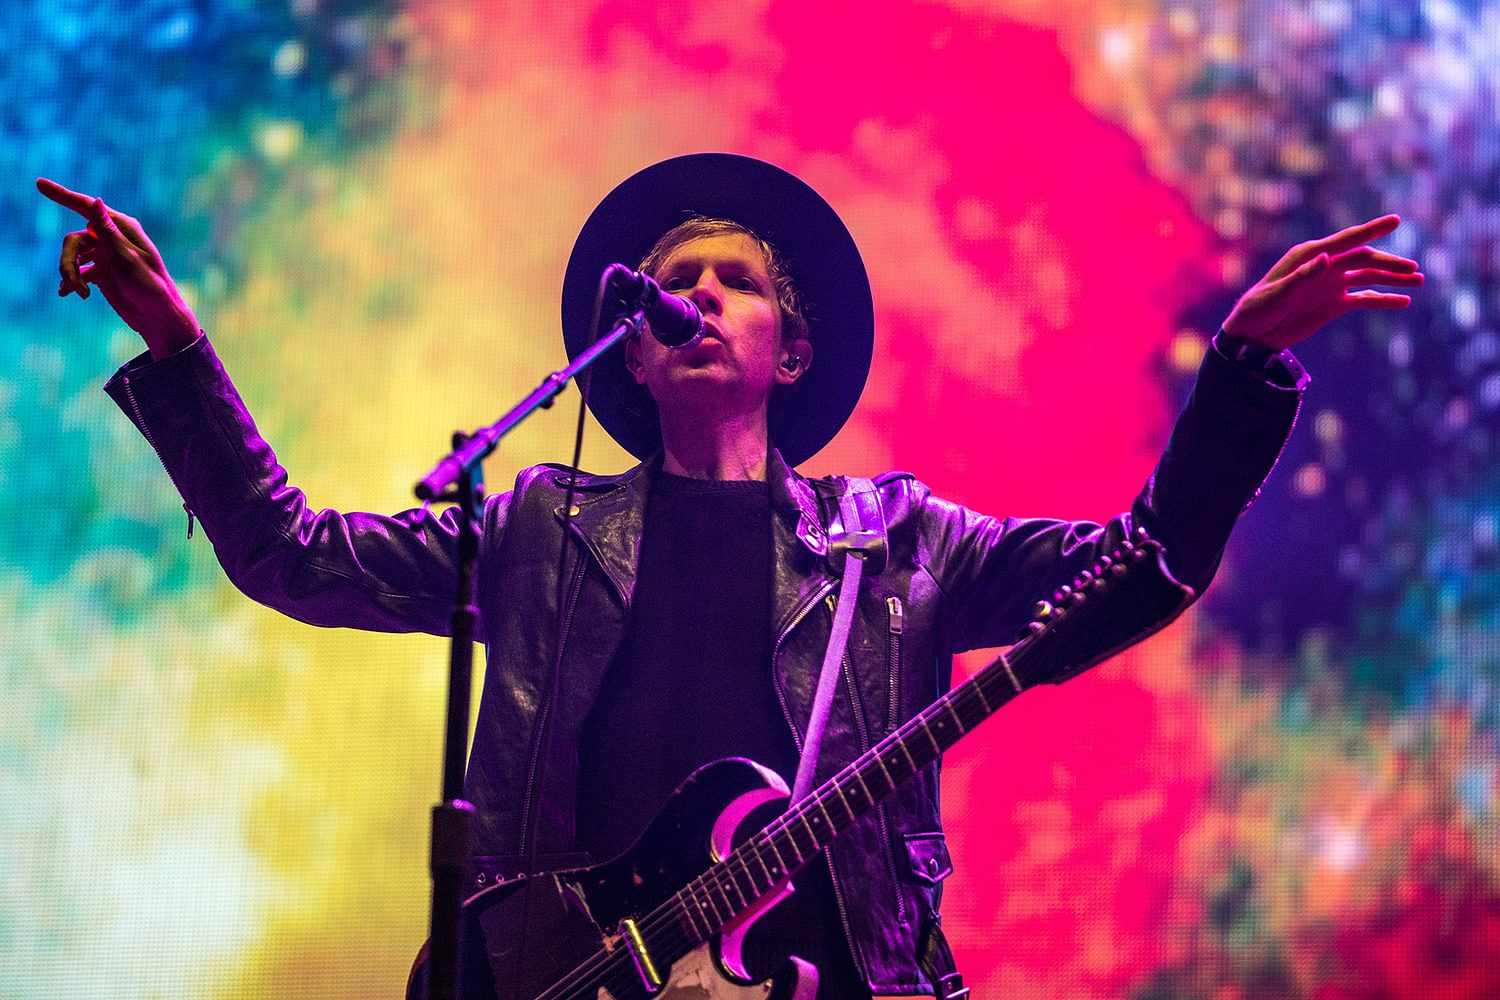 Watch Beck and members of Coldplay and Red Hot Chili Peppers form “new boy band”